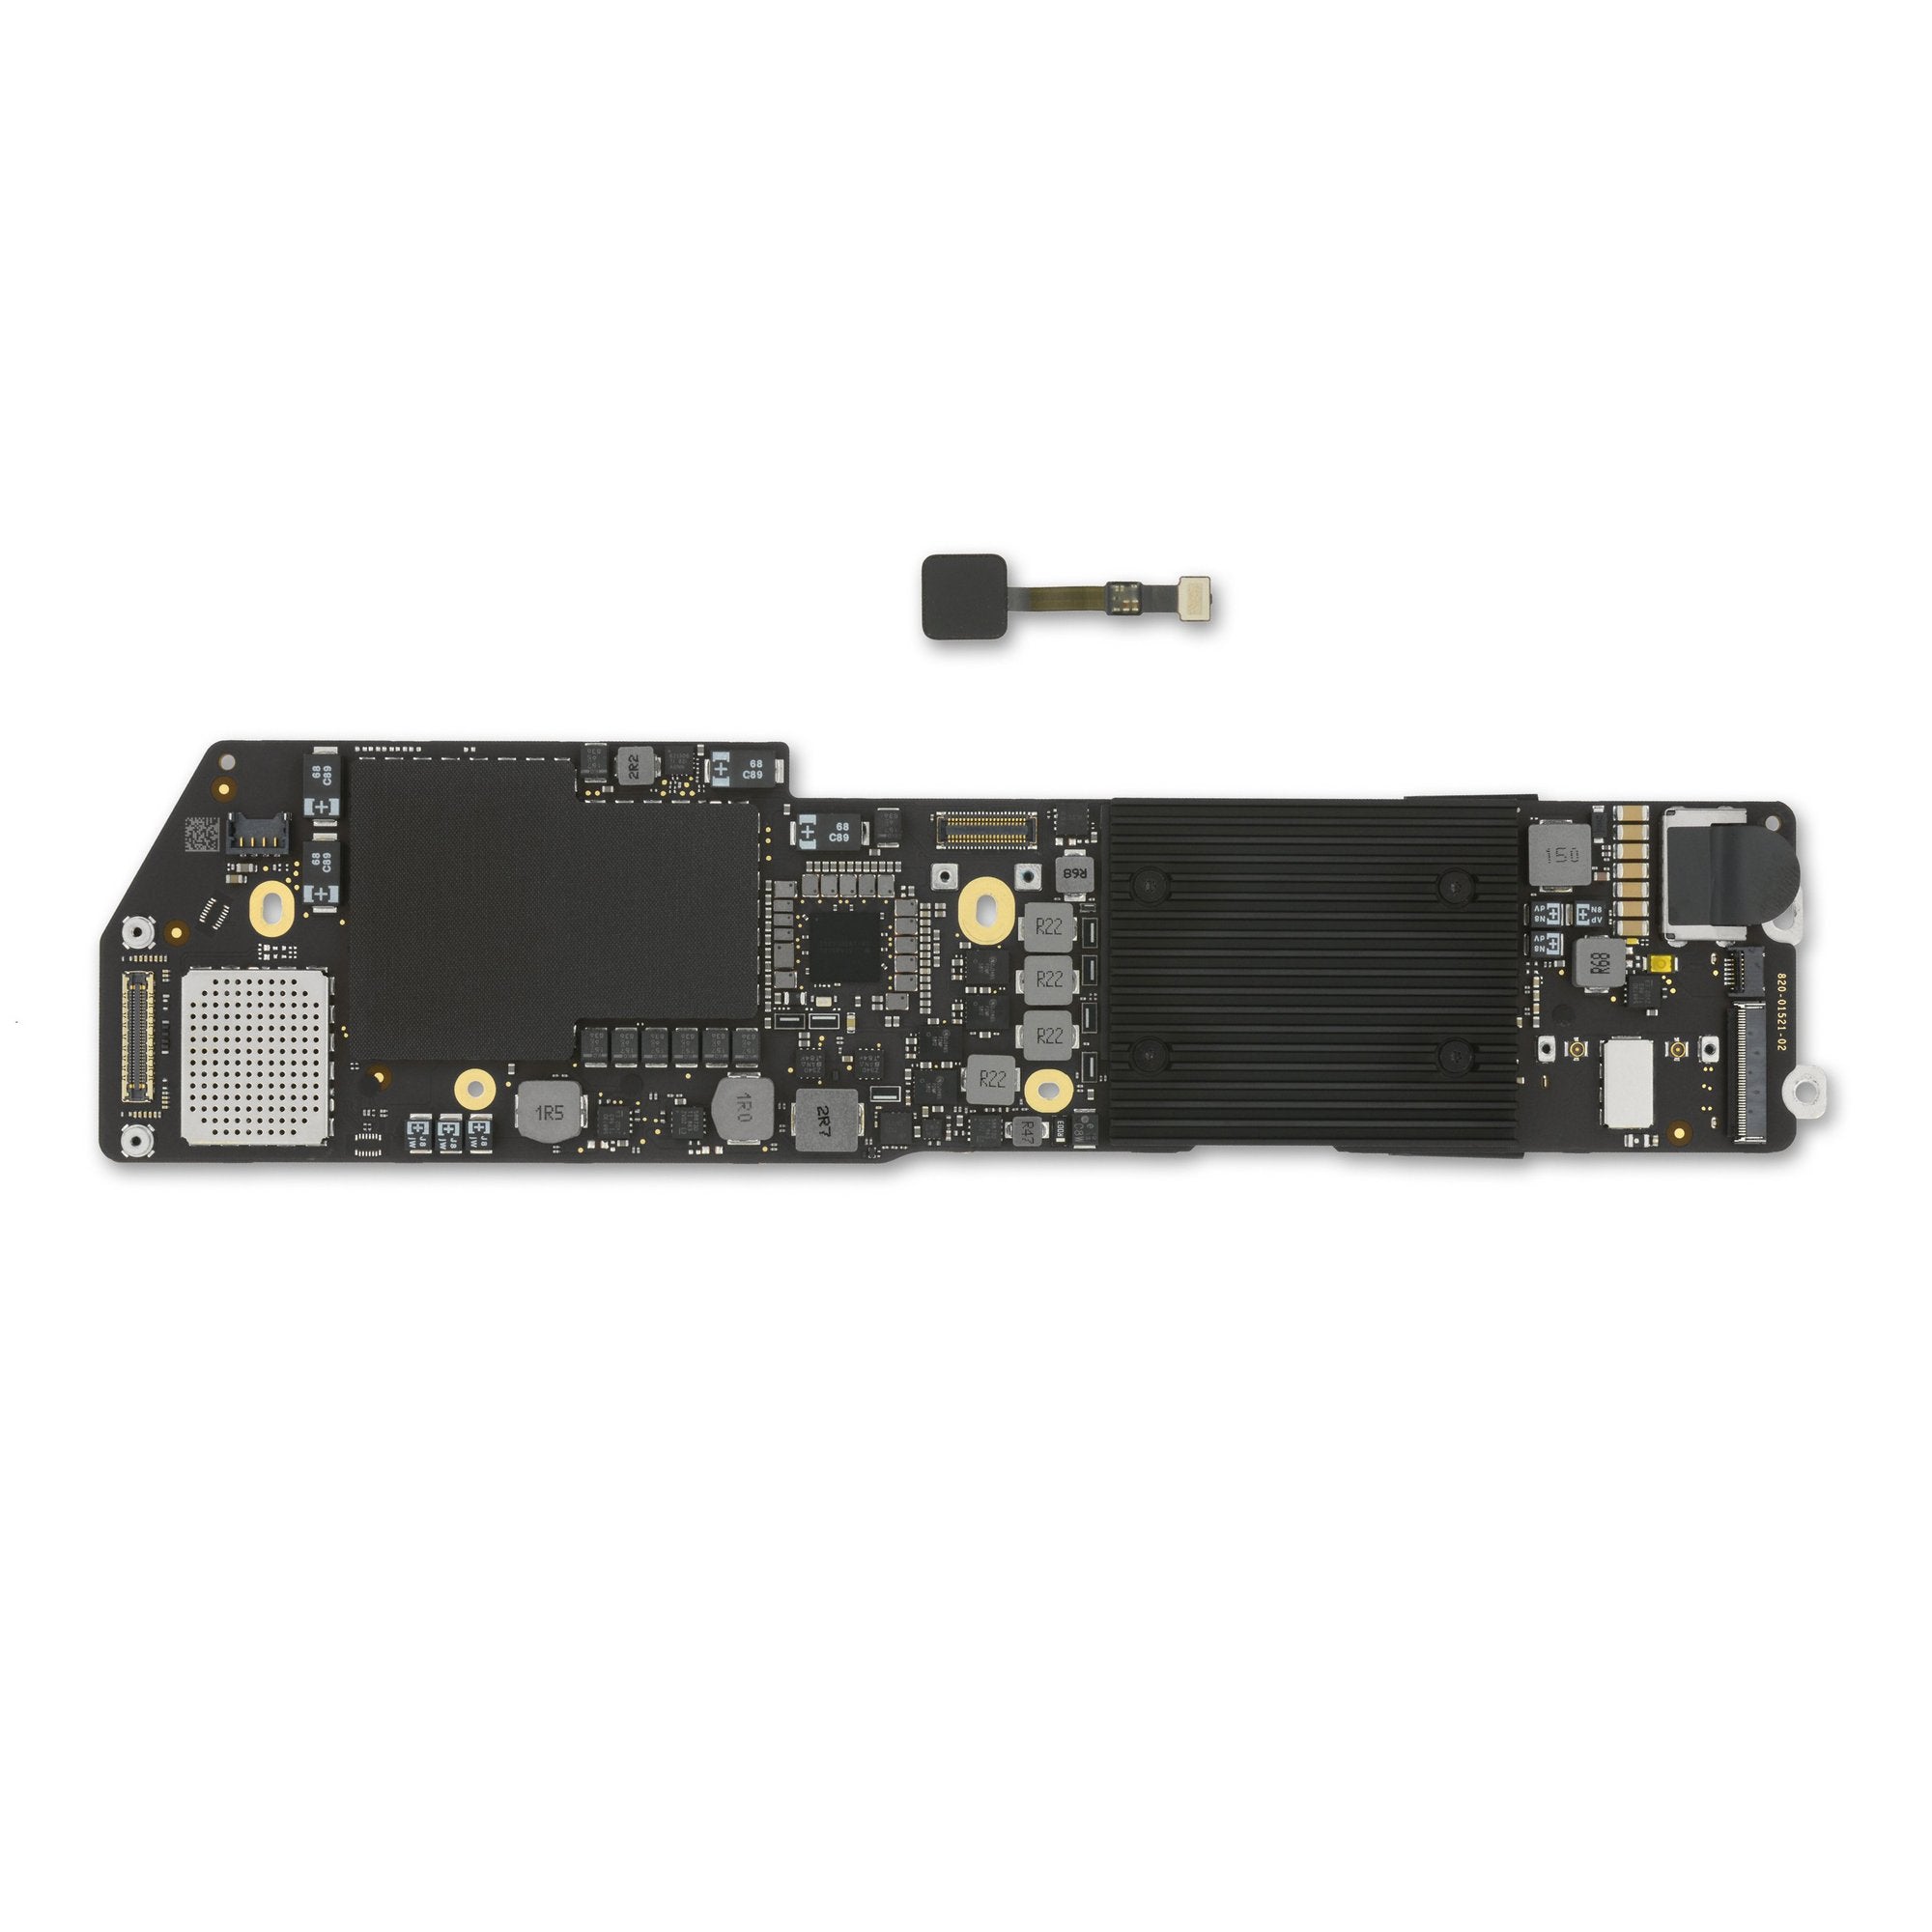 MacBook Air 13" (Late 2018-Mid 2019) 1.6 GHz Logic Board with Paired Touch ID Sensor 8 GB RAM 128 GB Used